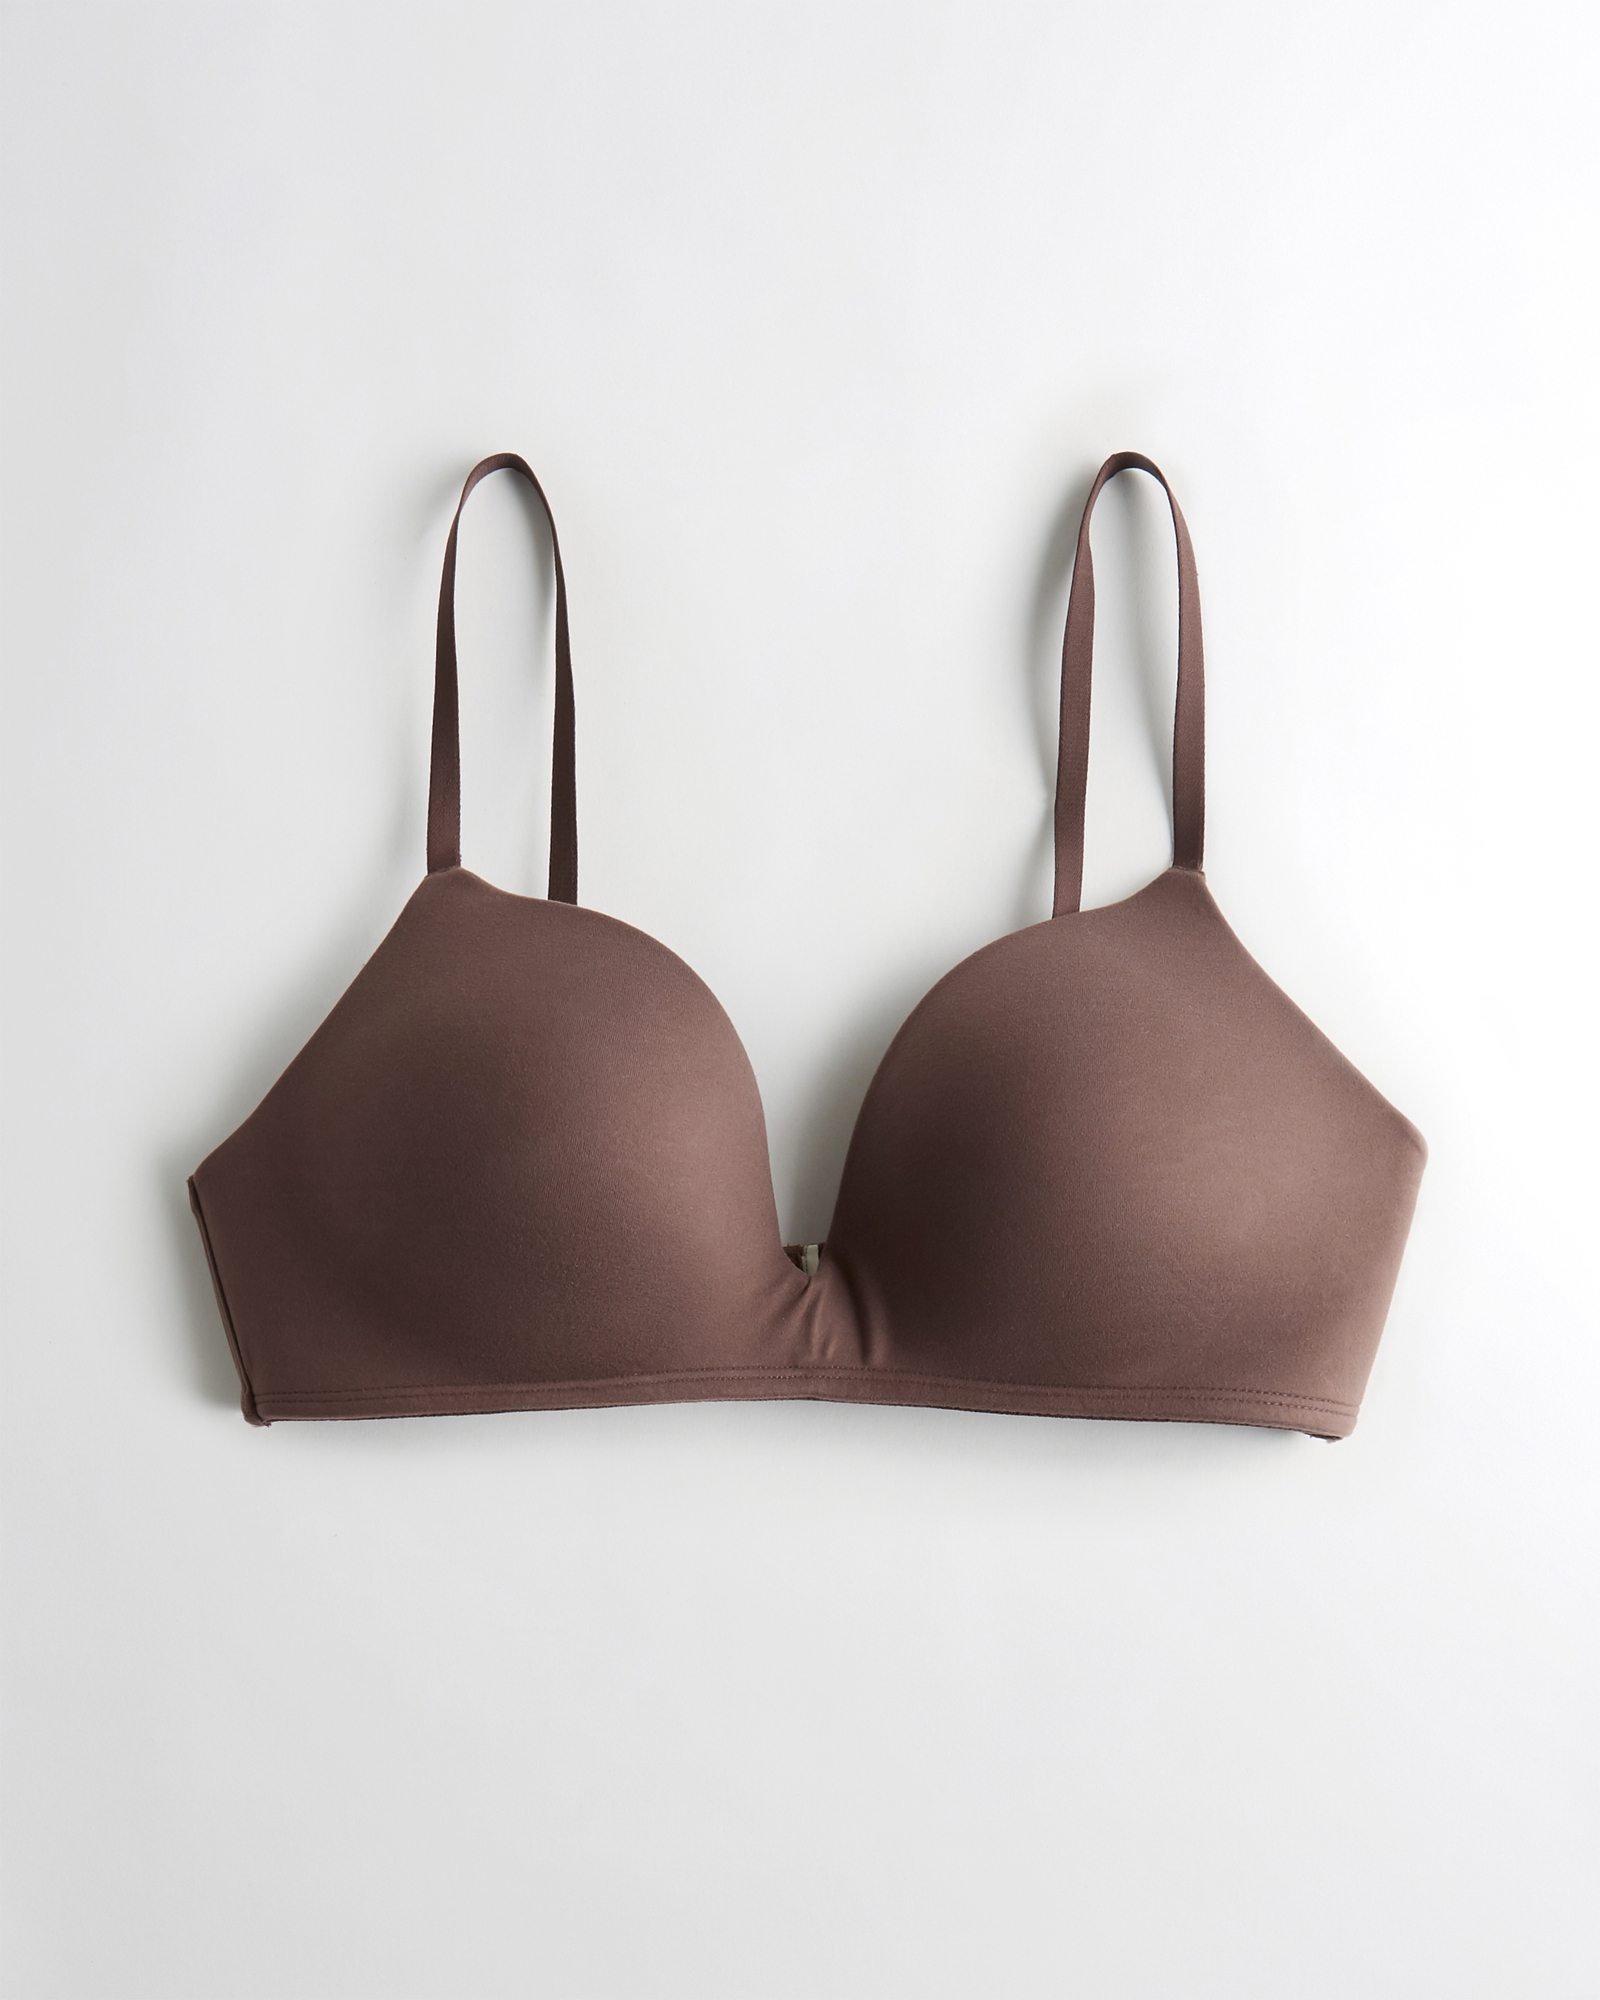 https://img.hollisterco.com/is/image/anf/KIC_308-2015-0381-421_prod1.jpg?policy=product-extra-large